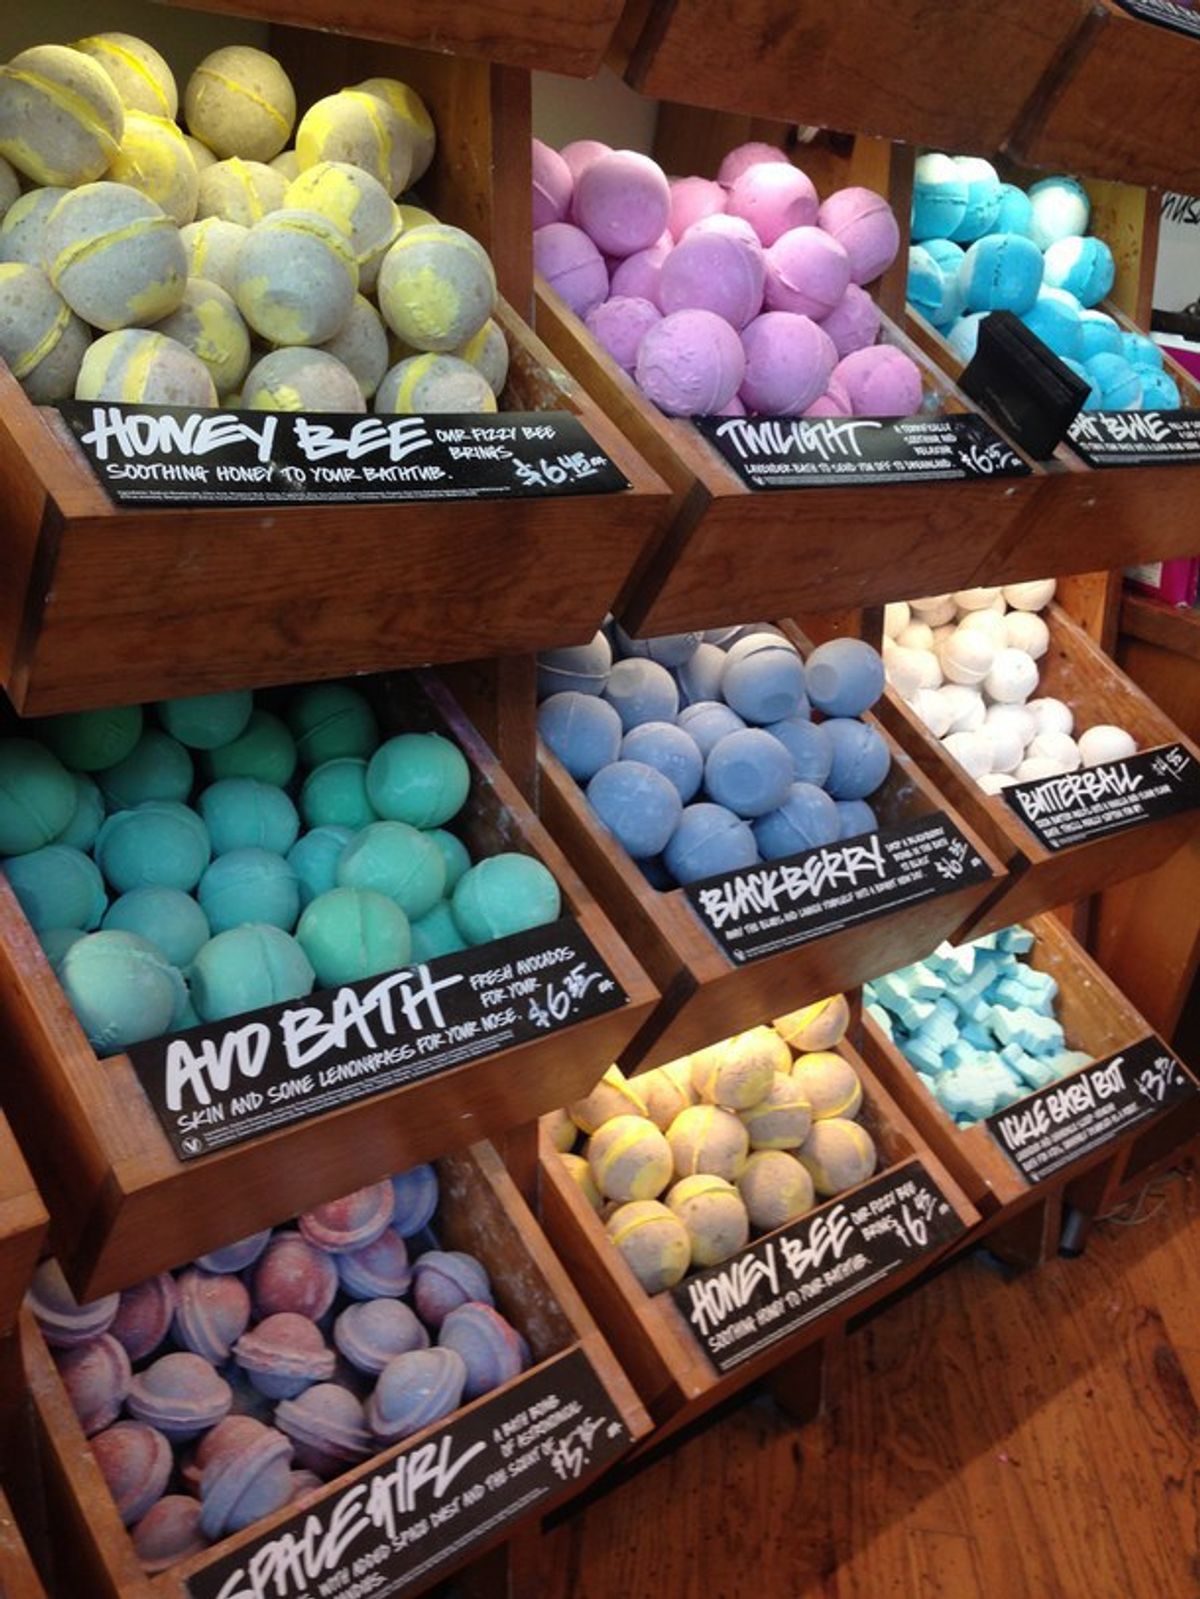 LUSH Is More Than Just Bath Bombs